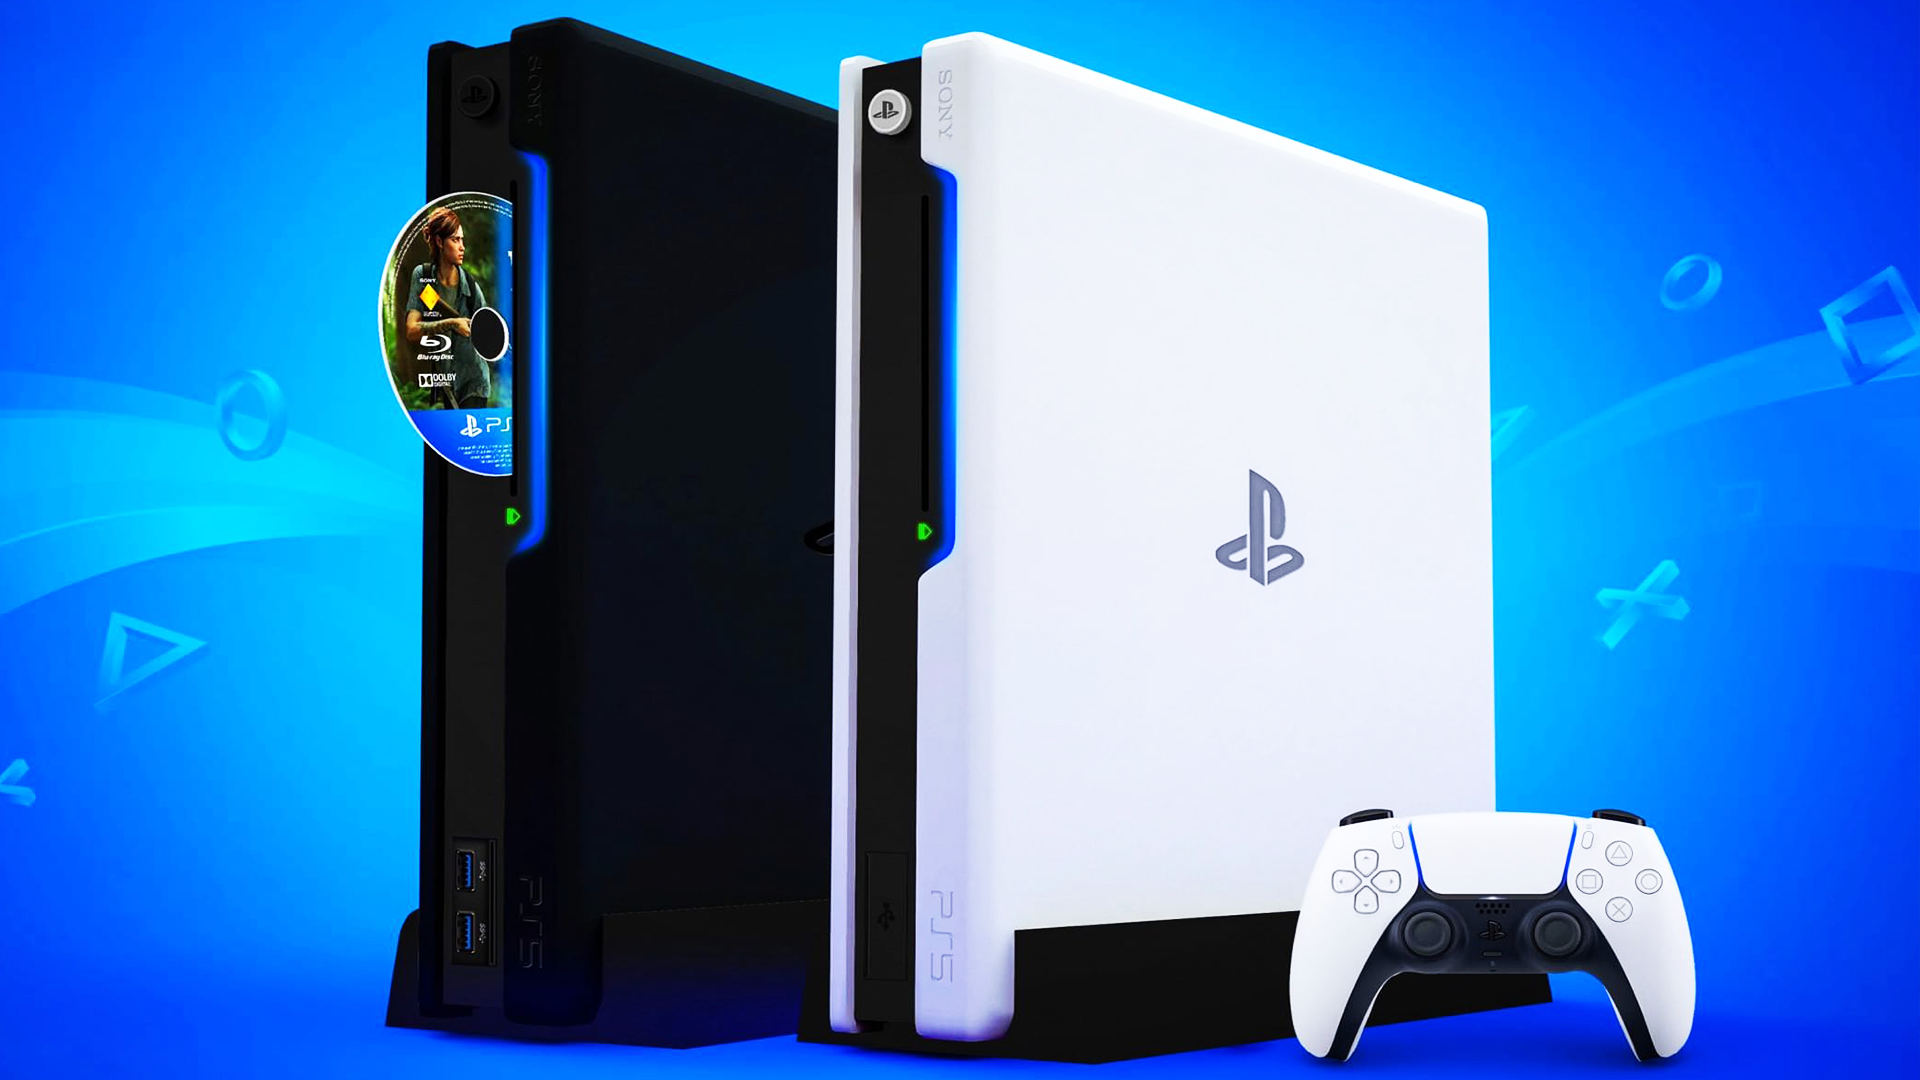 EXCLUSIVE - PS5 Pro in Development, Could Release Late 2024